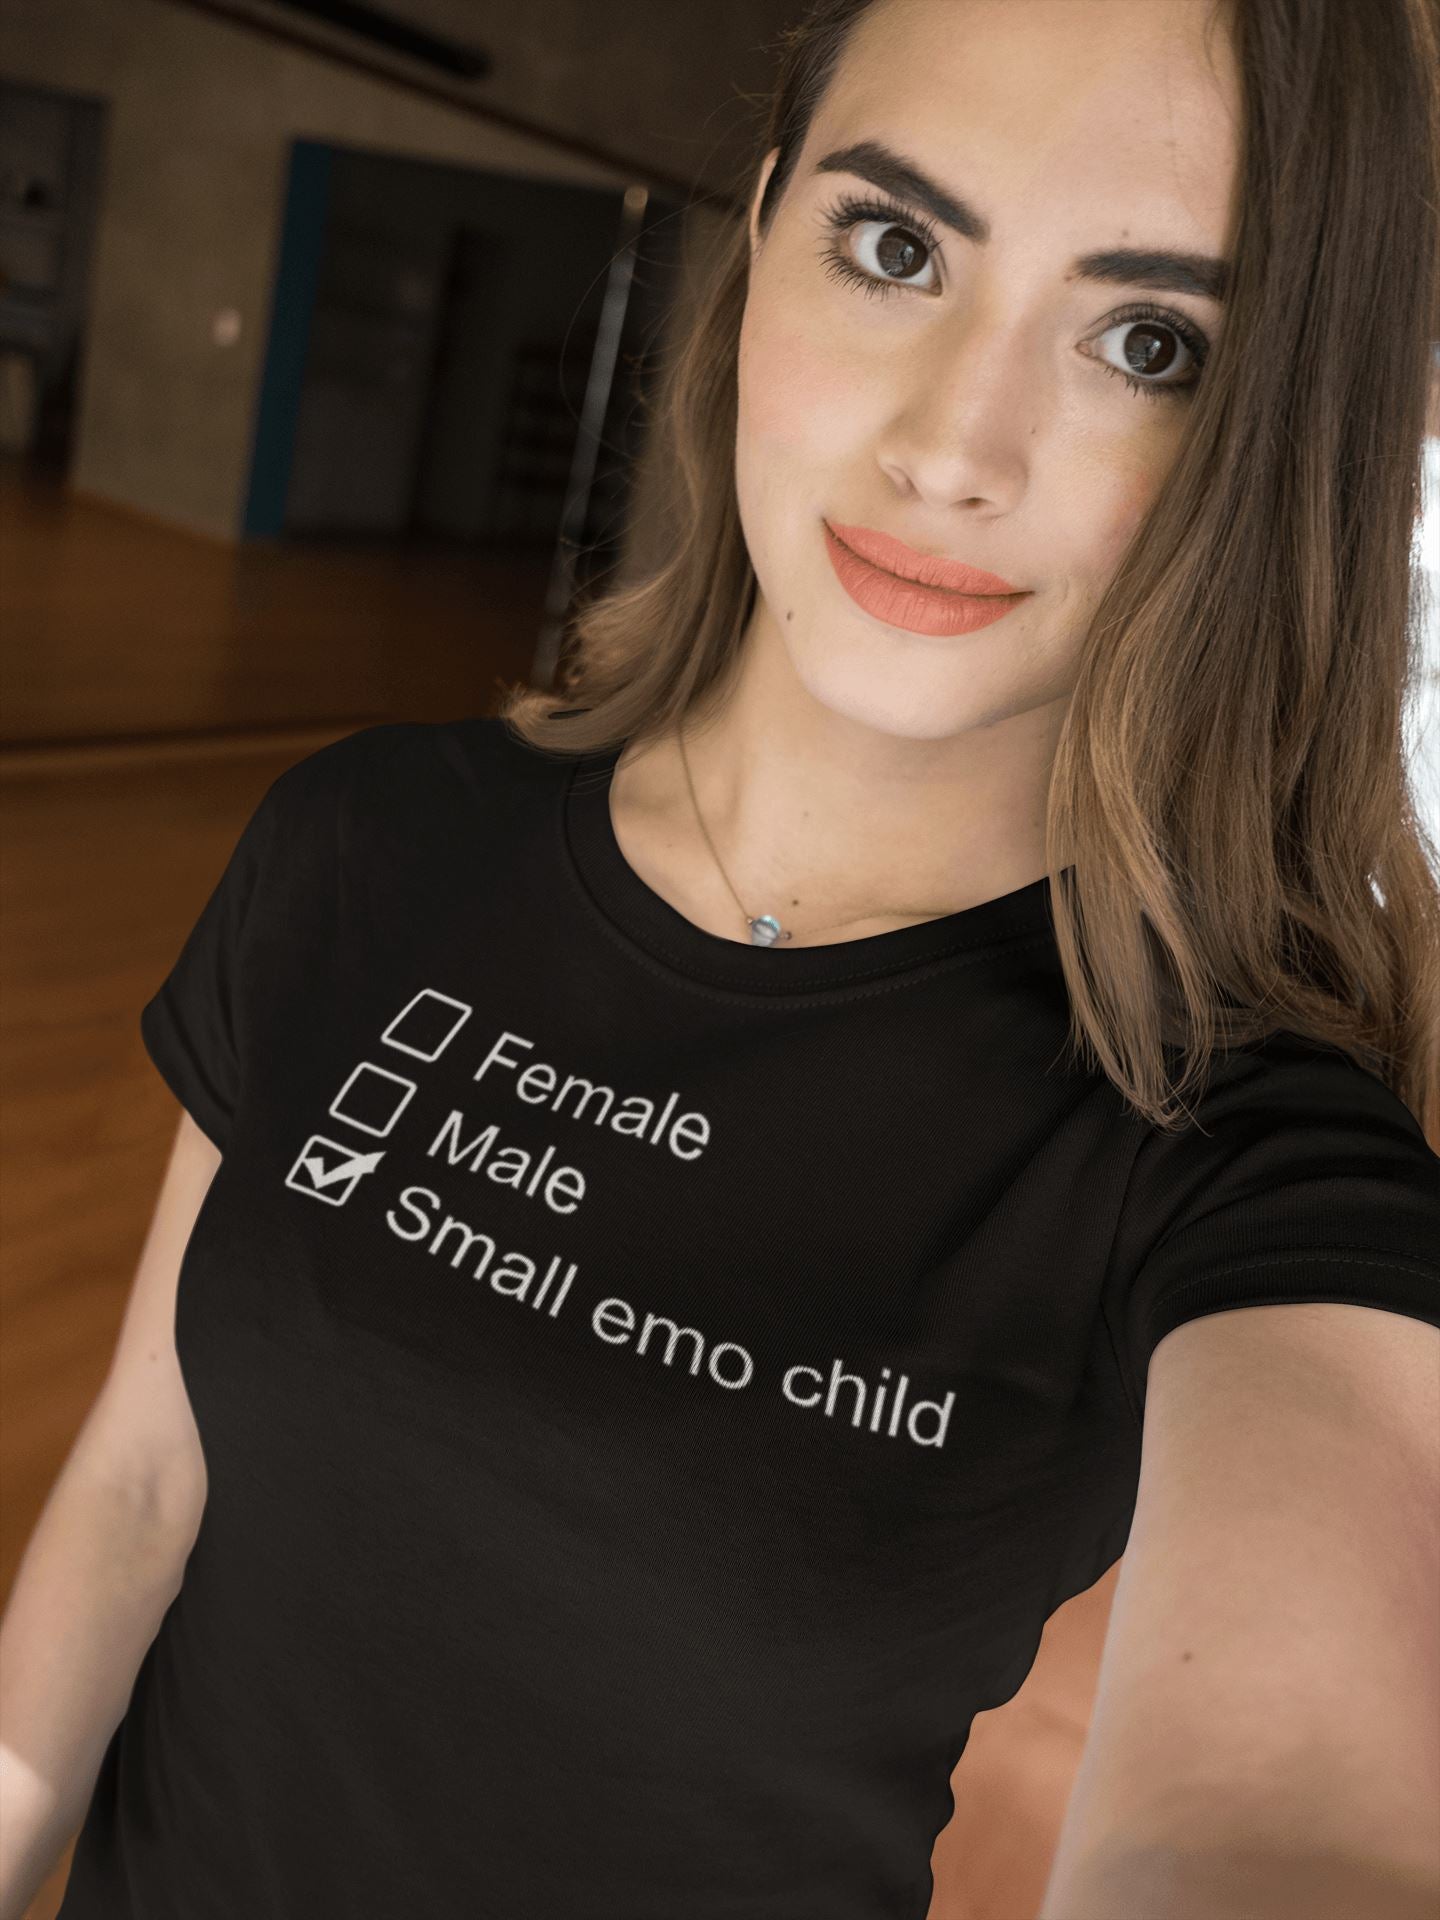 Small Emo Child Funny Unisex T Shirt | Premium Design | Catch My Drift India - Catch My Drift India  black, clothing, couples, female, funny, general, made in india, shirt, t shirt, trending,